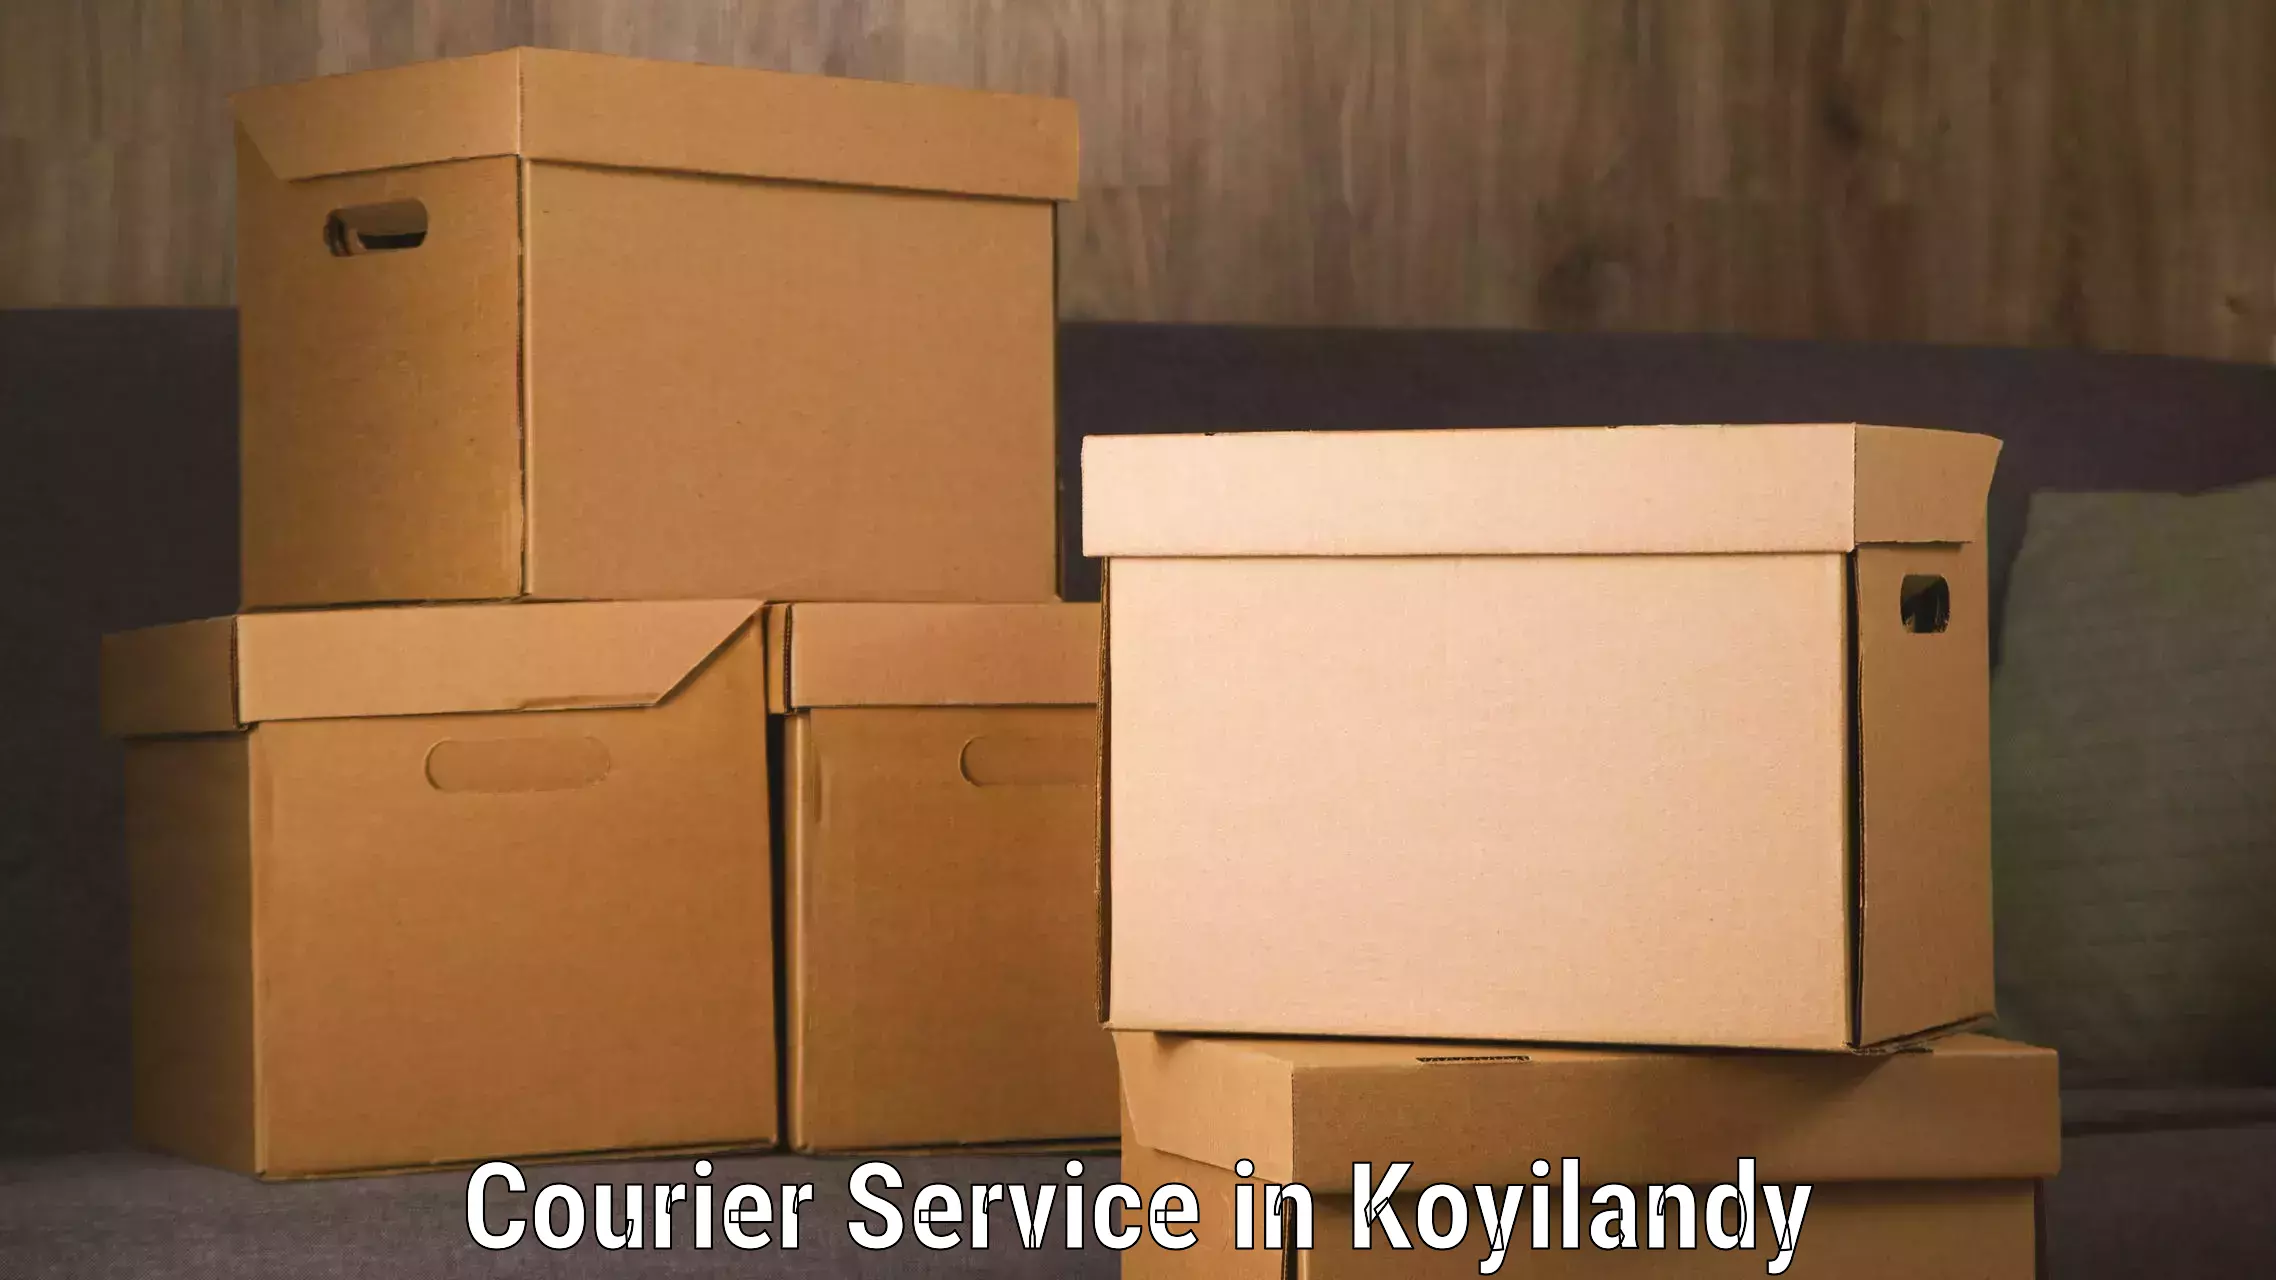 Courier rate comparison in Koyilandy